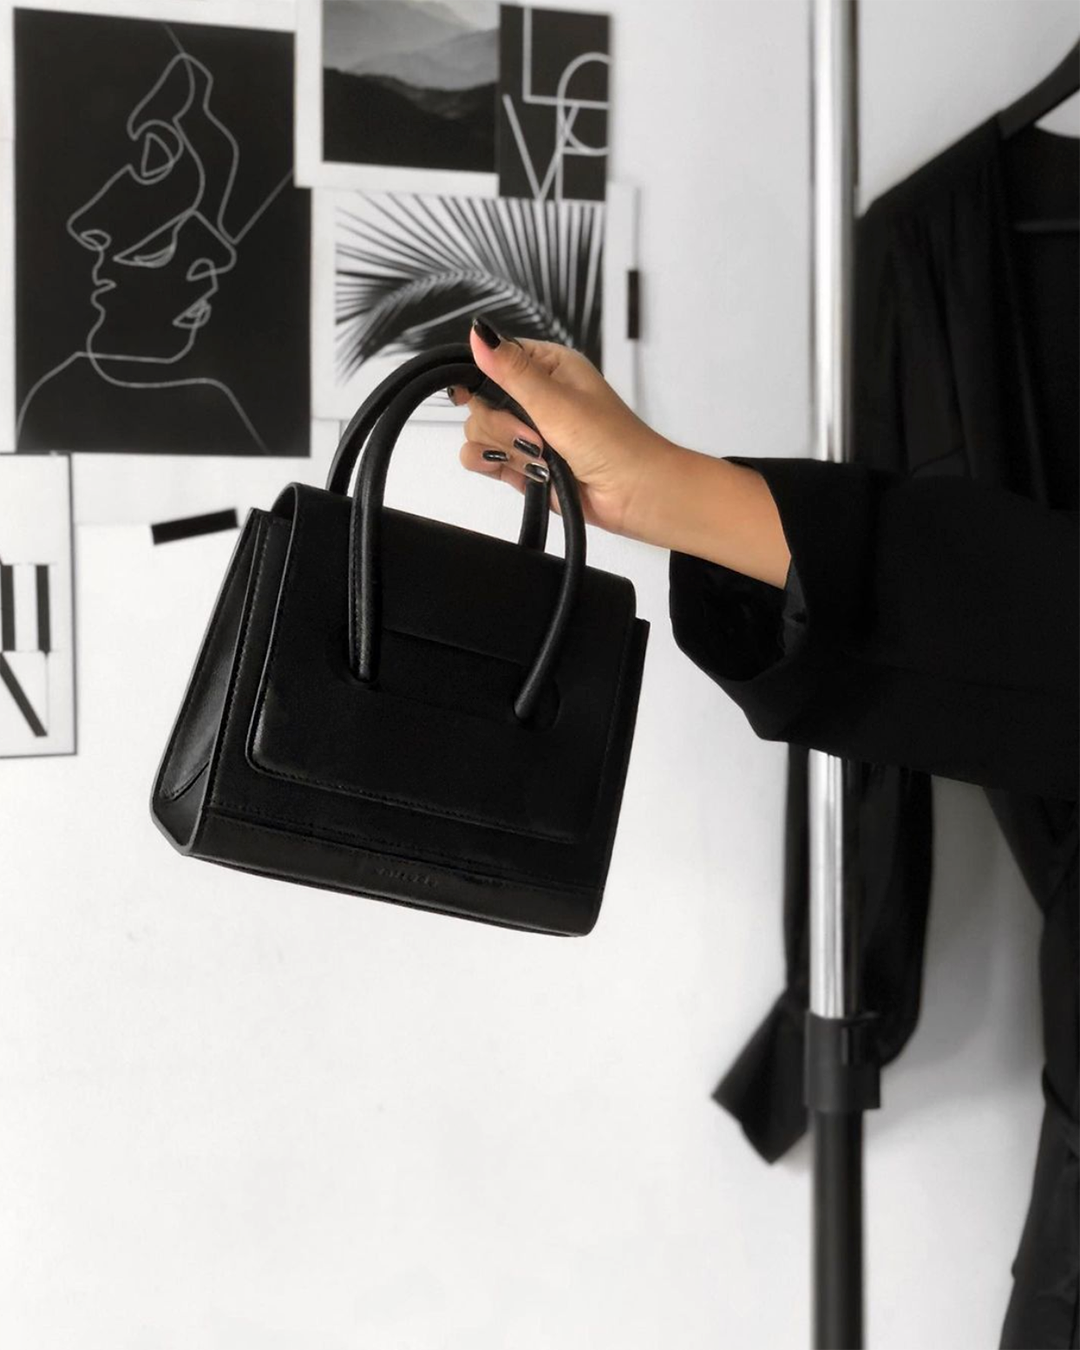 Unitude | Women Bags - Minimalist Bags for Everyday Use